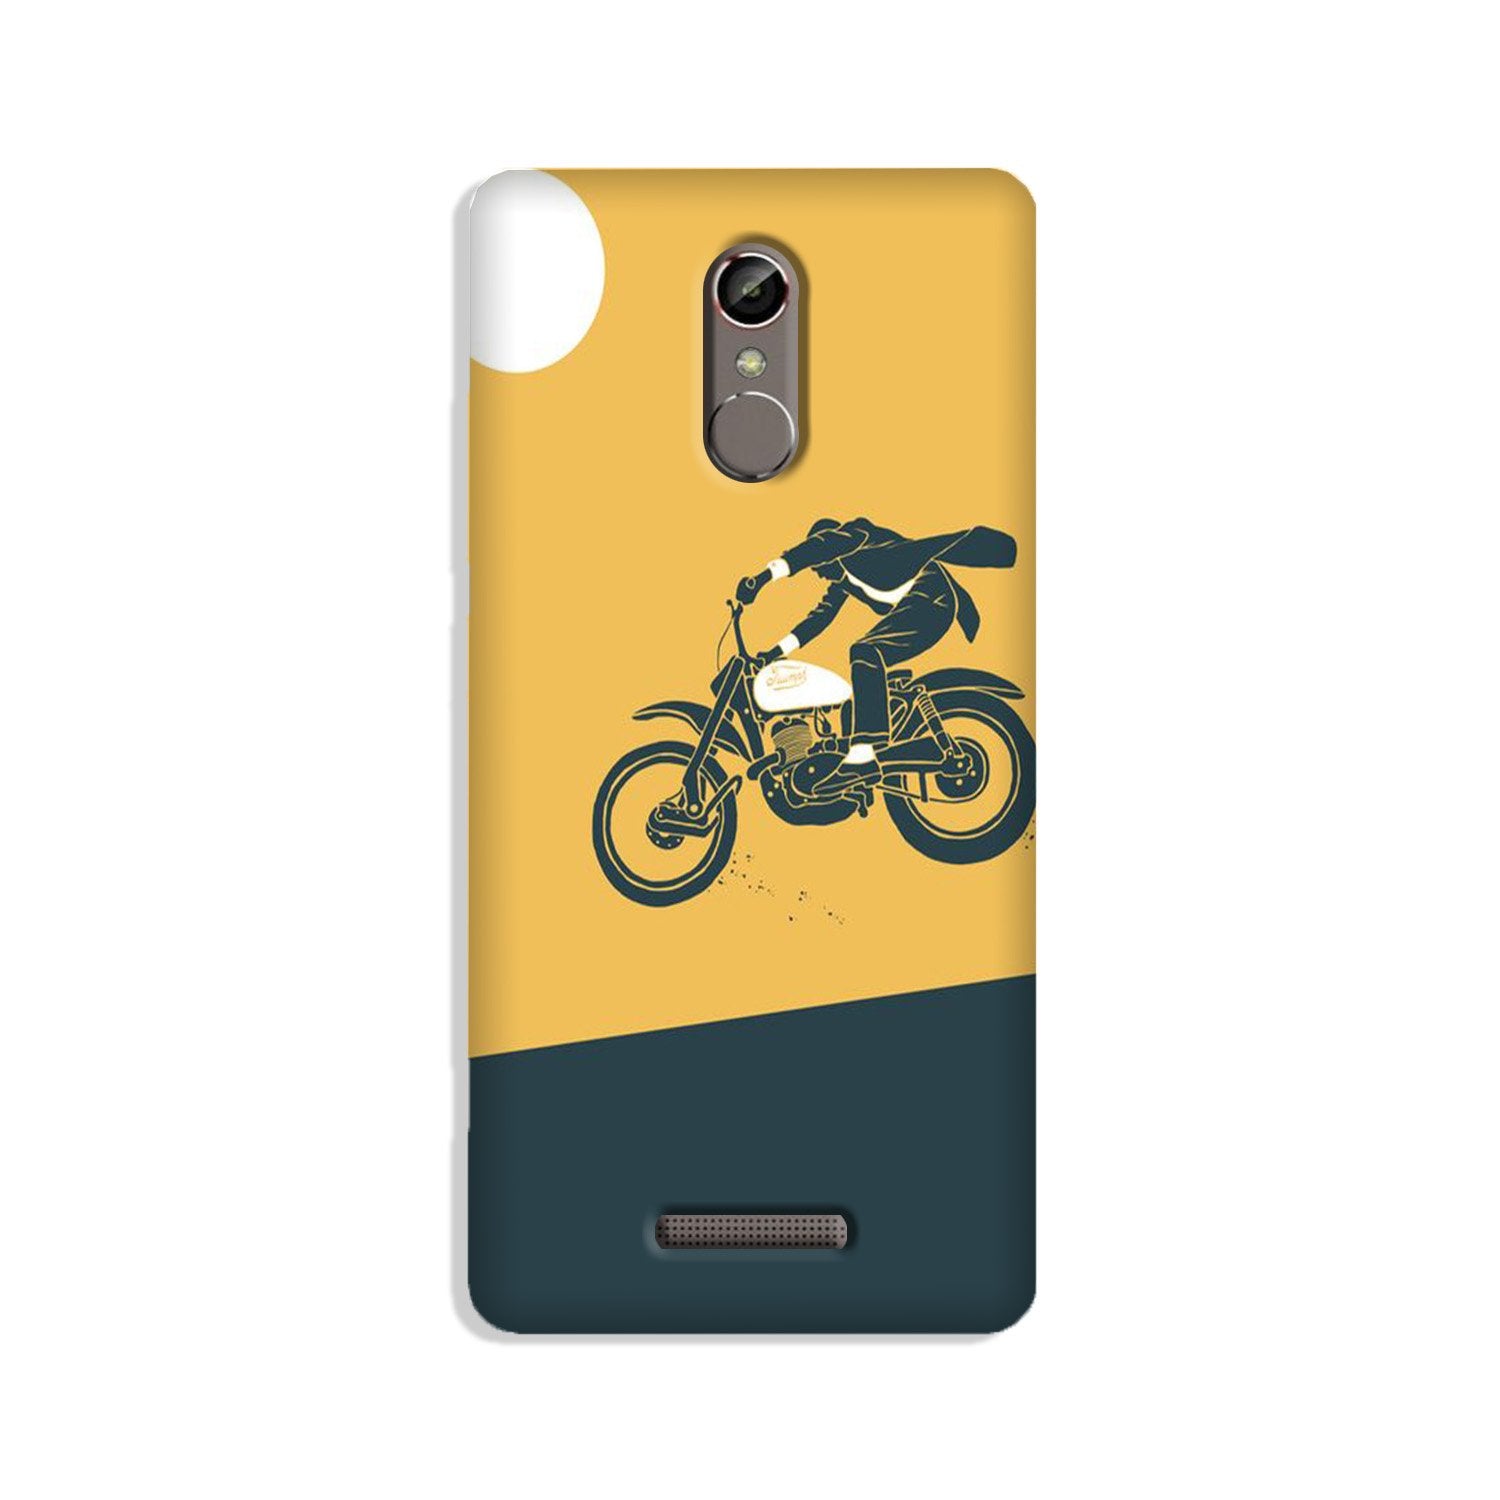 Bike Lovers Case for Gionee S6s (Design No. 256)